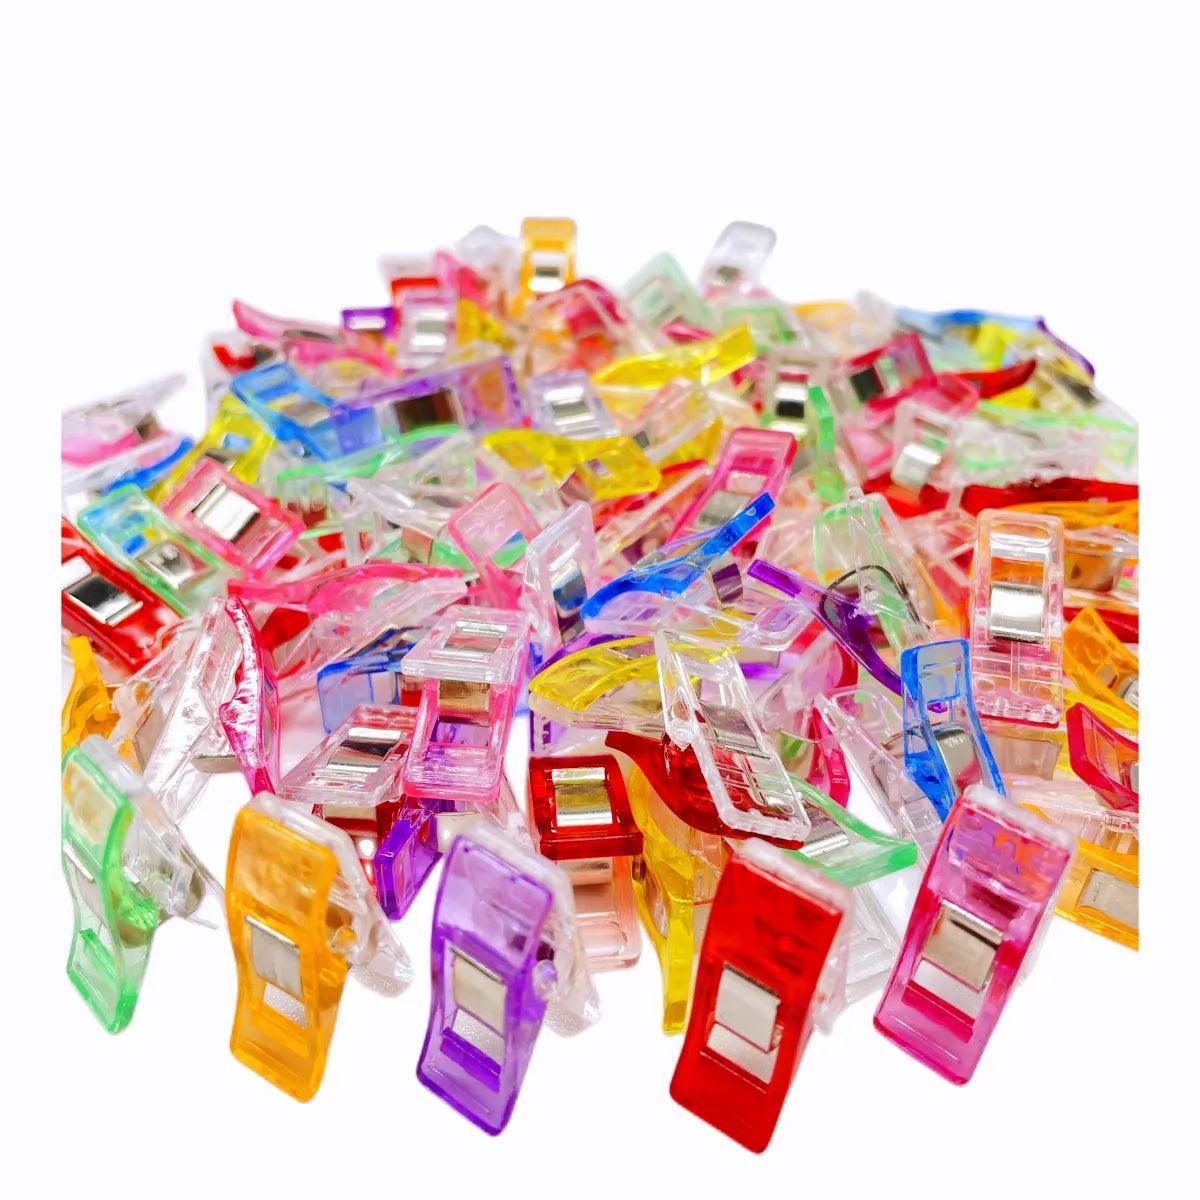 Colorful Sewing Clips Set - 50PCS Plastic Craft Safety Clips for Crocheting, Knitting, and Binding  ourlum.com   